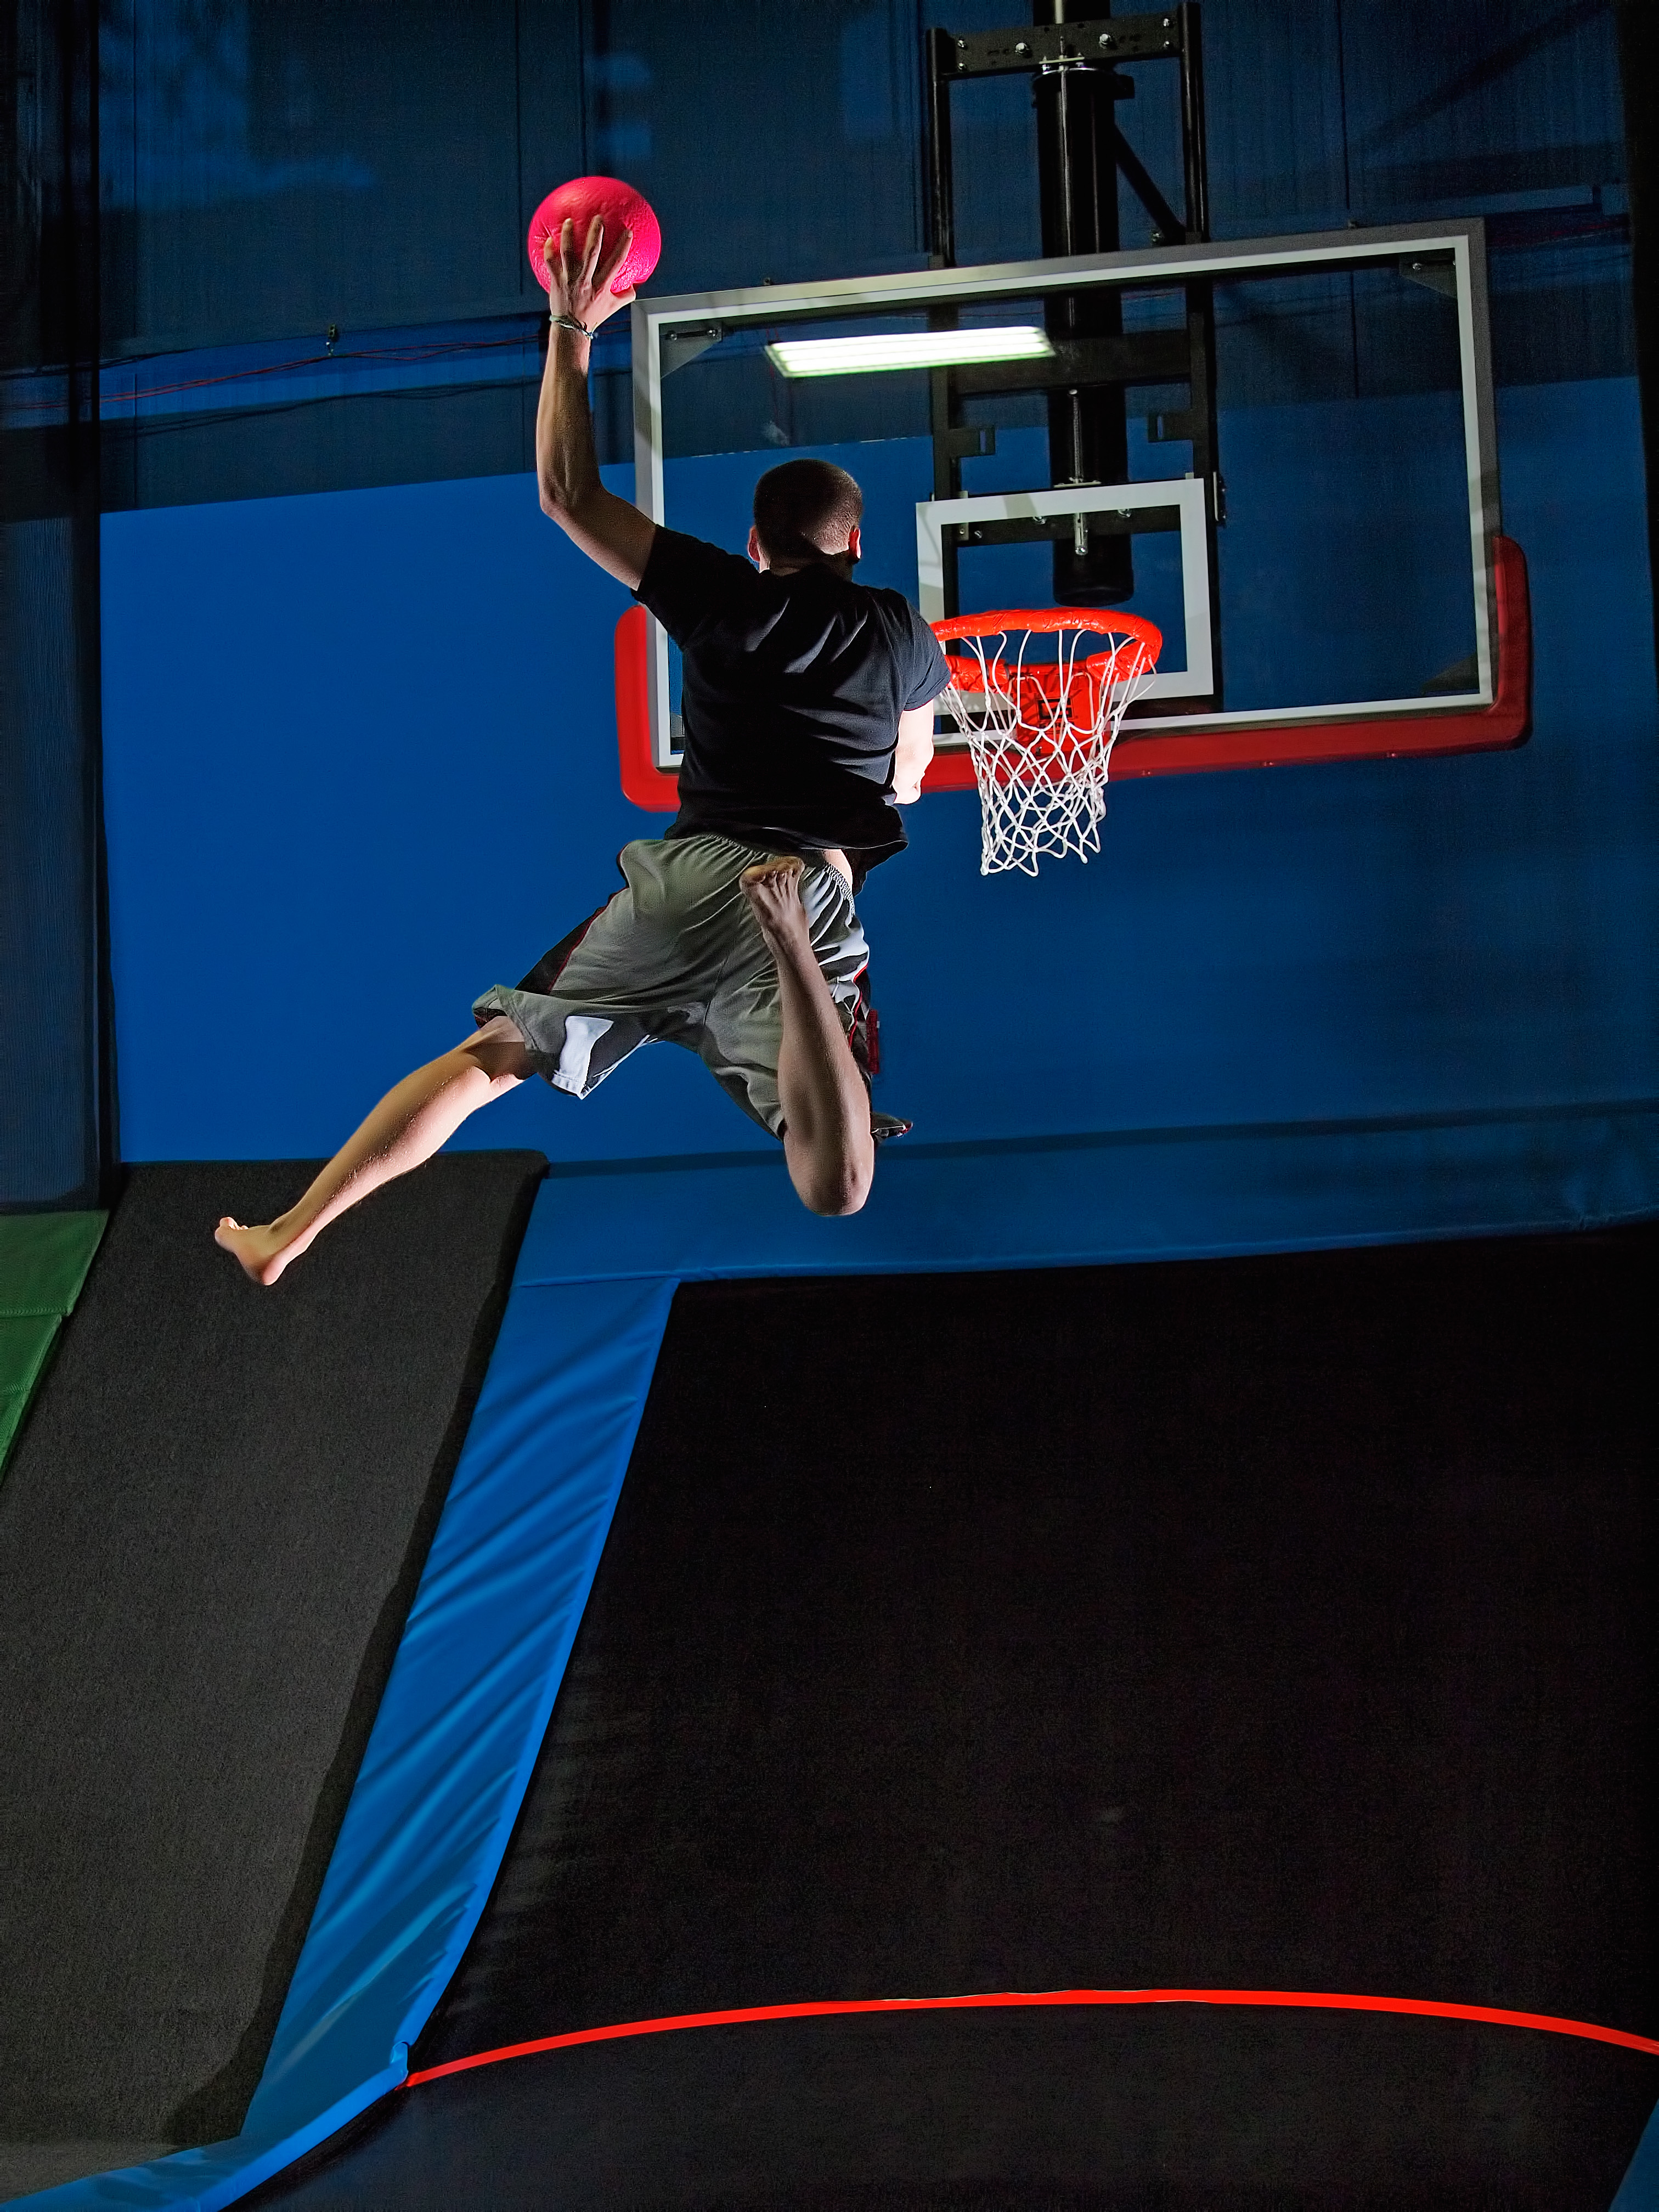 Slam dunk basketball at Bounce! Trampoline Sports is popular with all age groups.